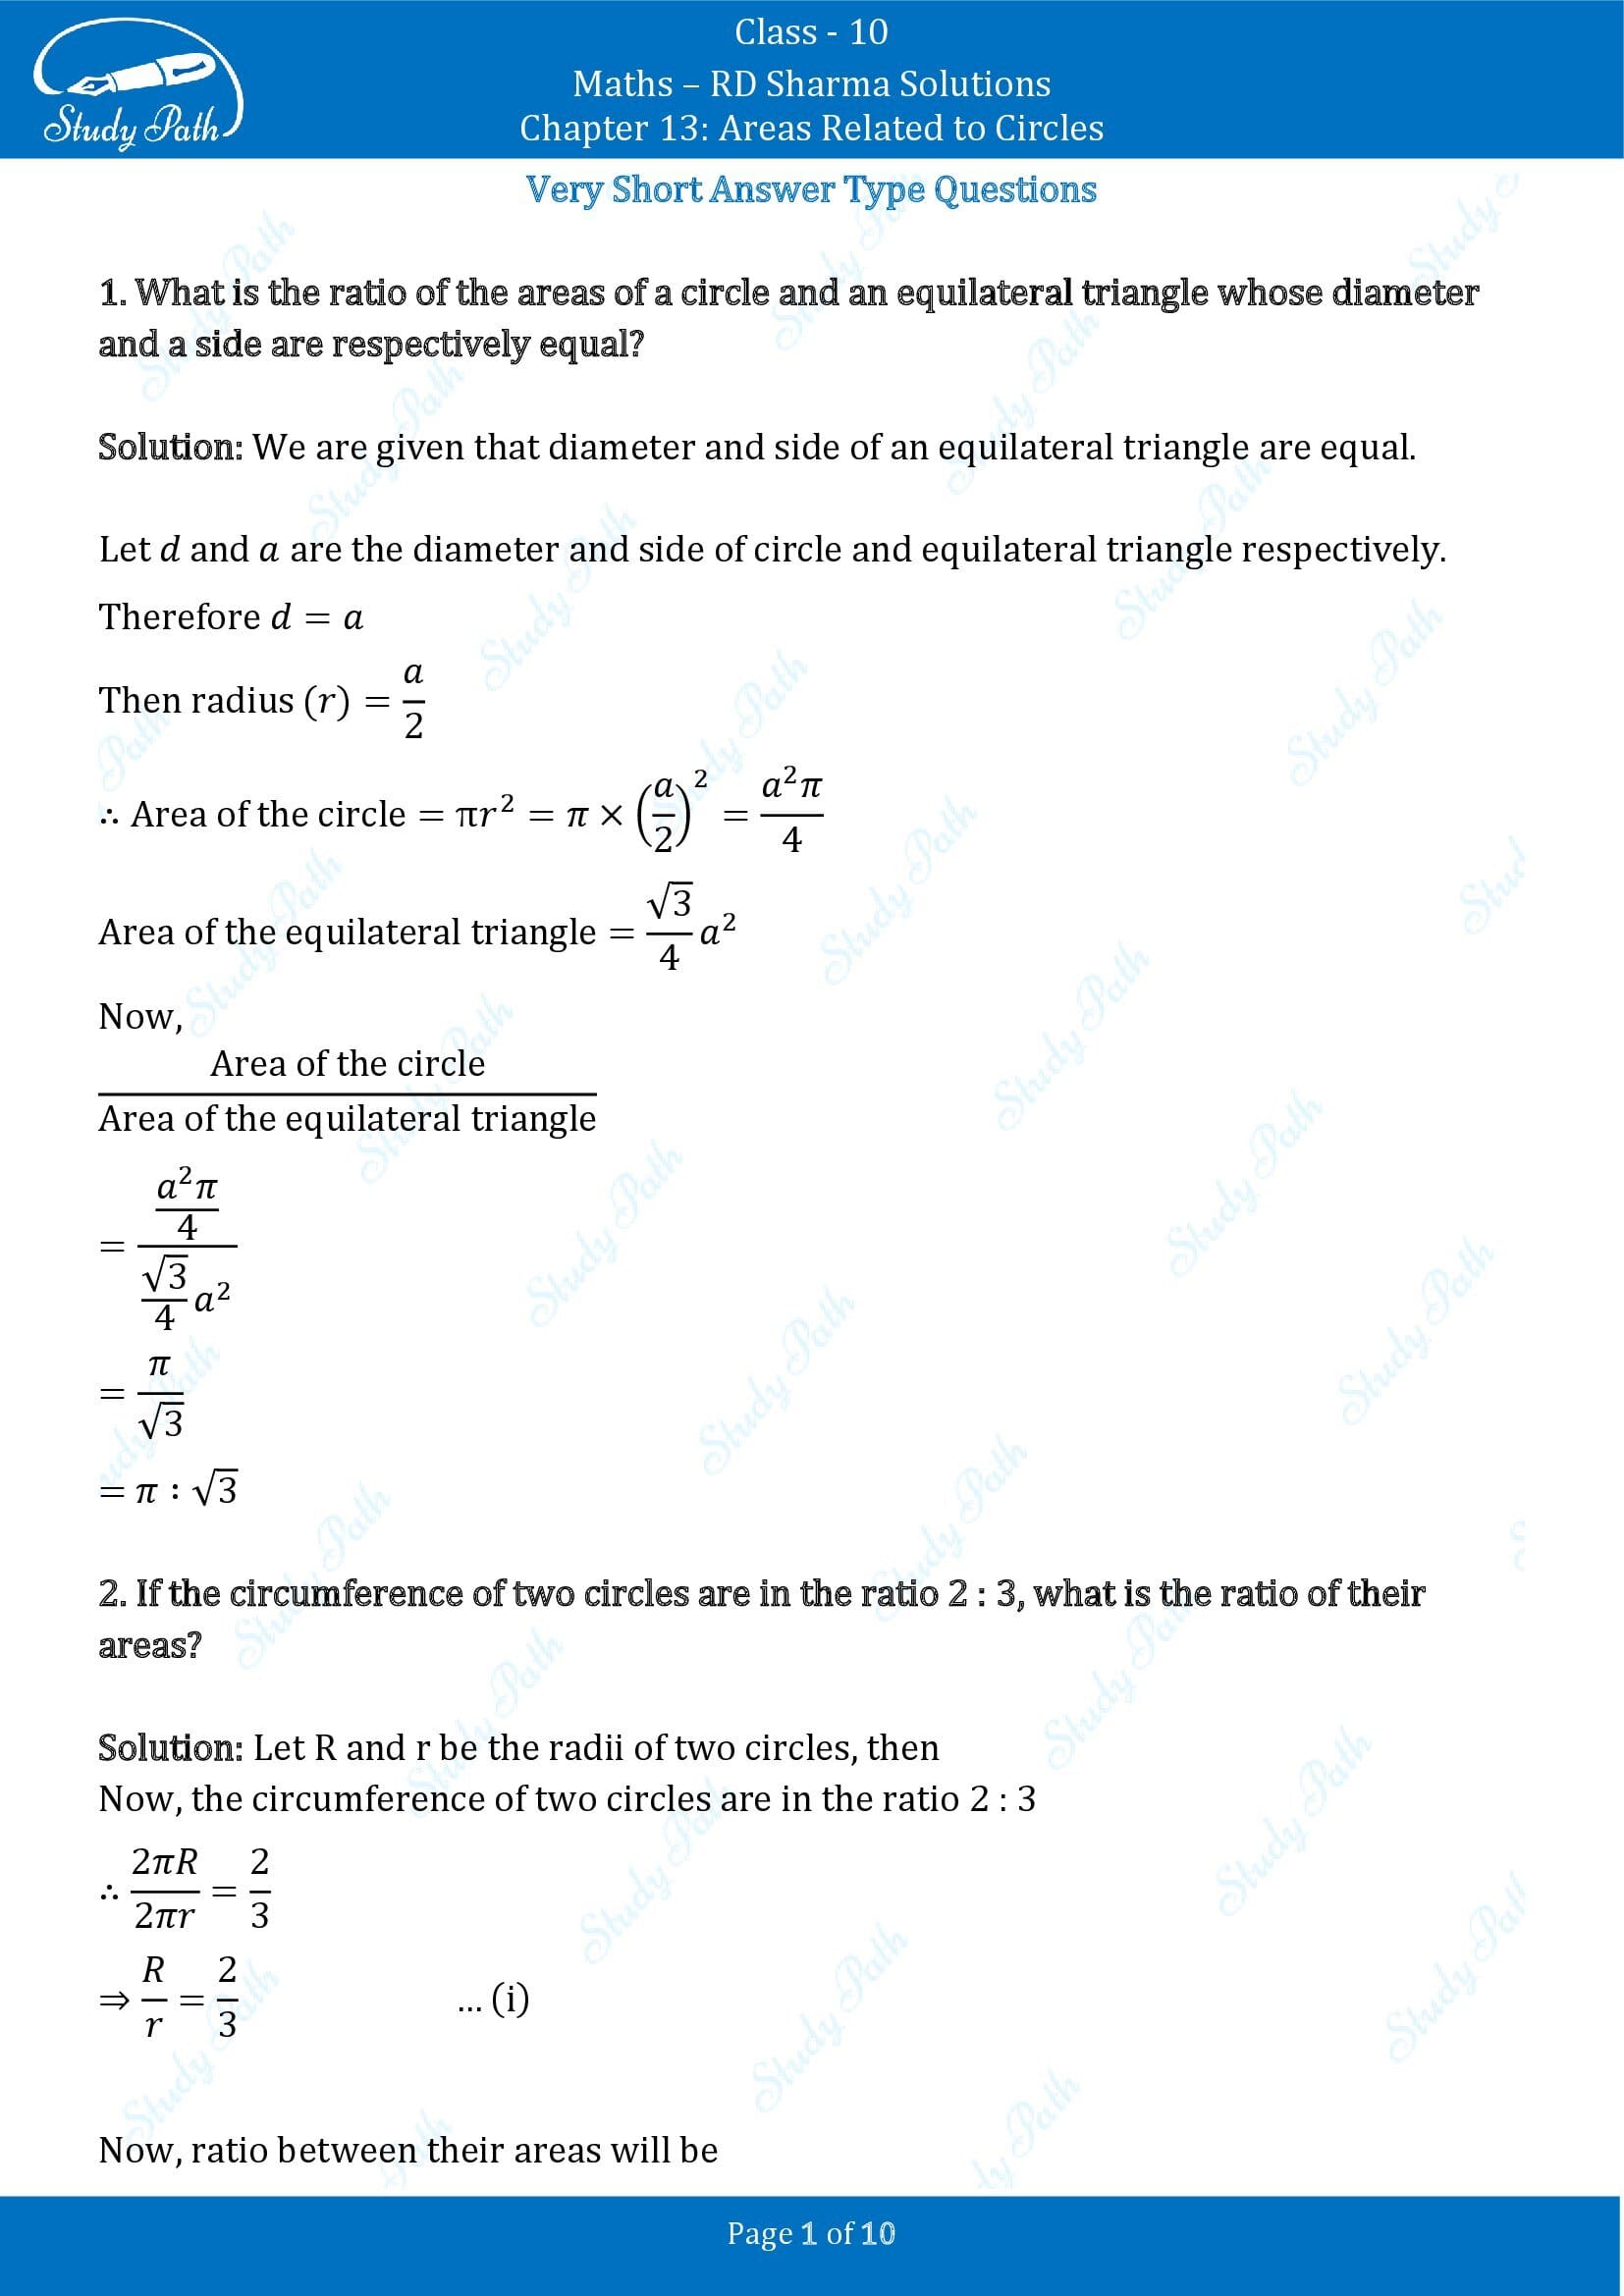 RD Sharma Solutions Class 10 Chapter 13 Areas Related to Circles Very Short Answer Type Questions VSAQs 00001